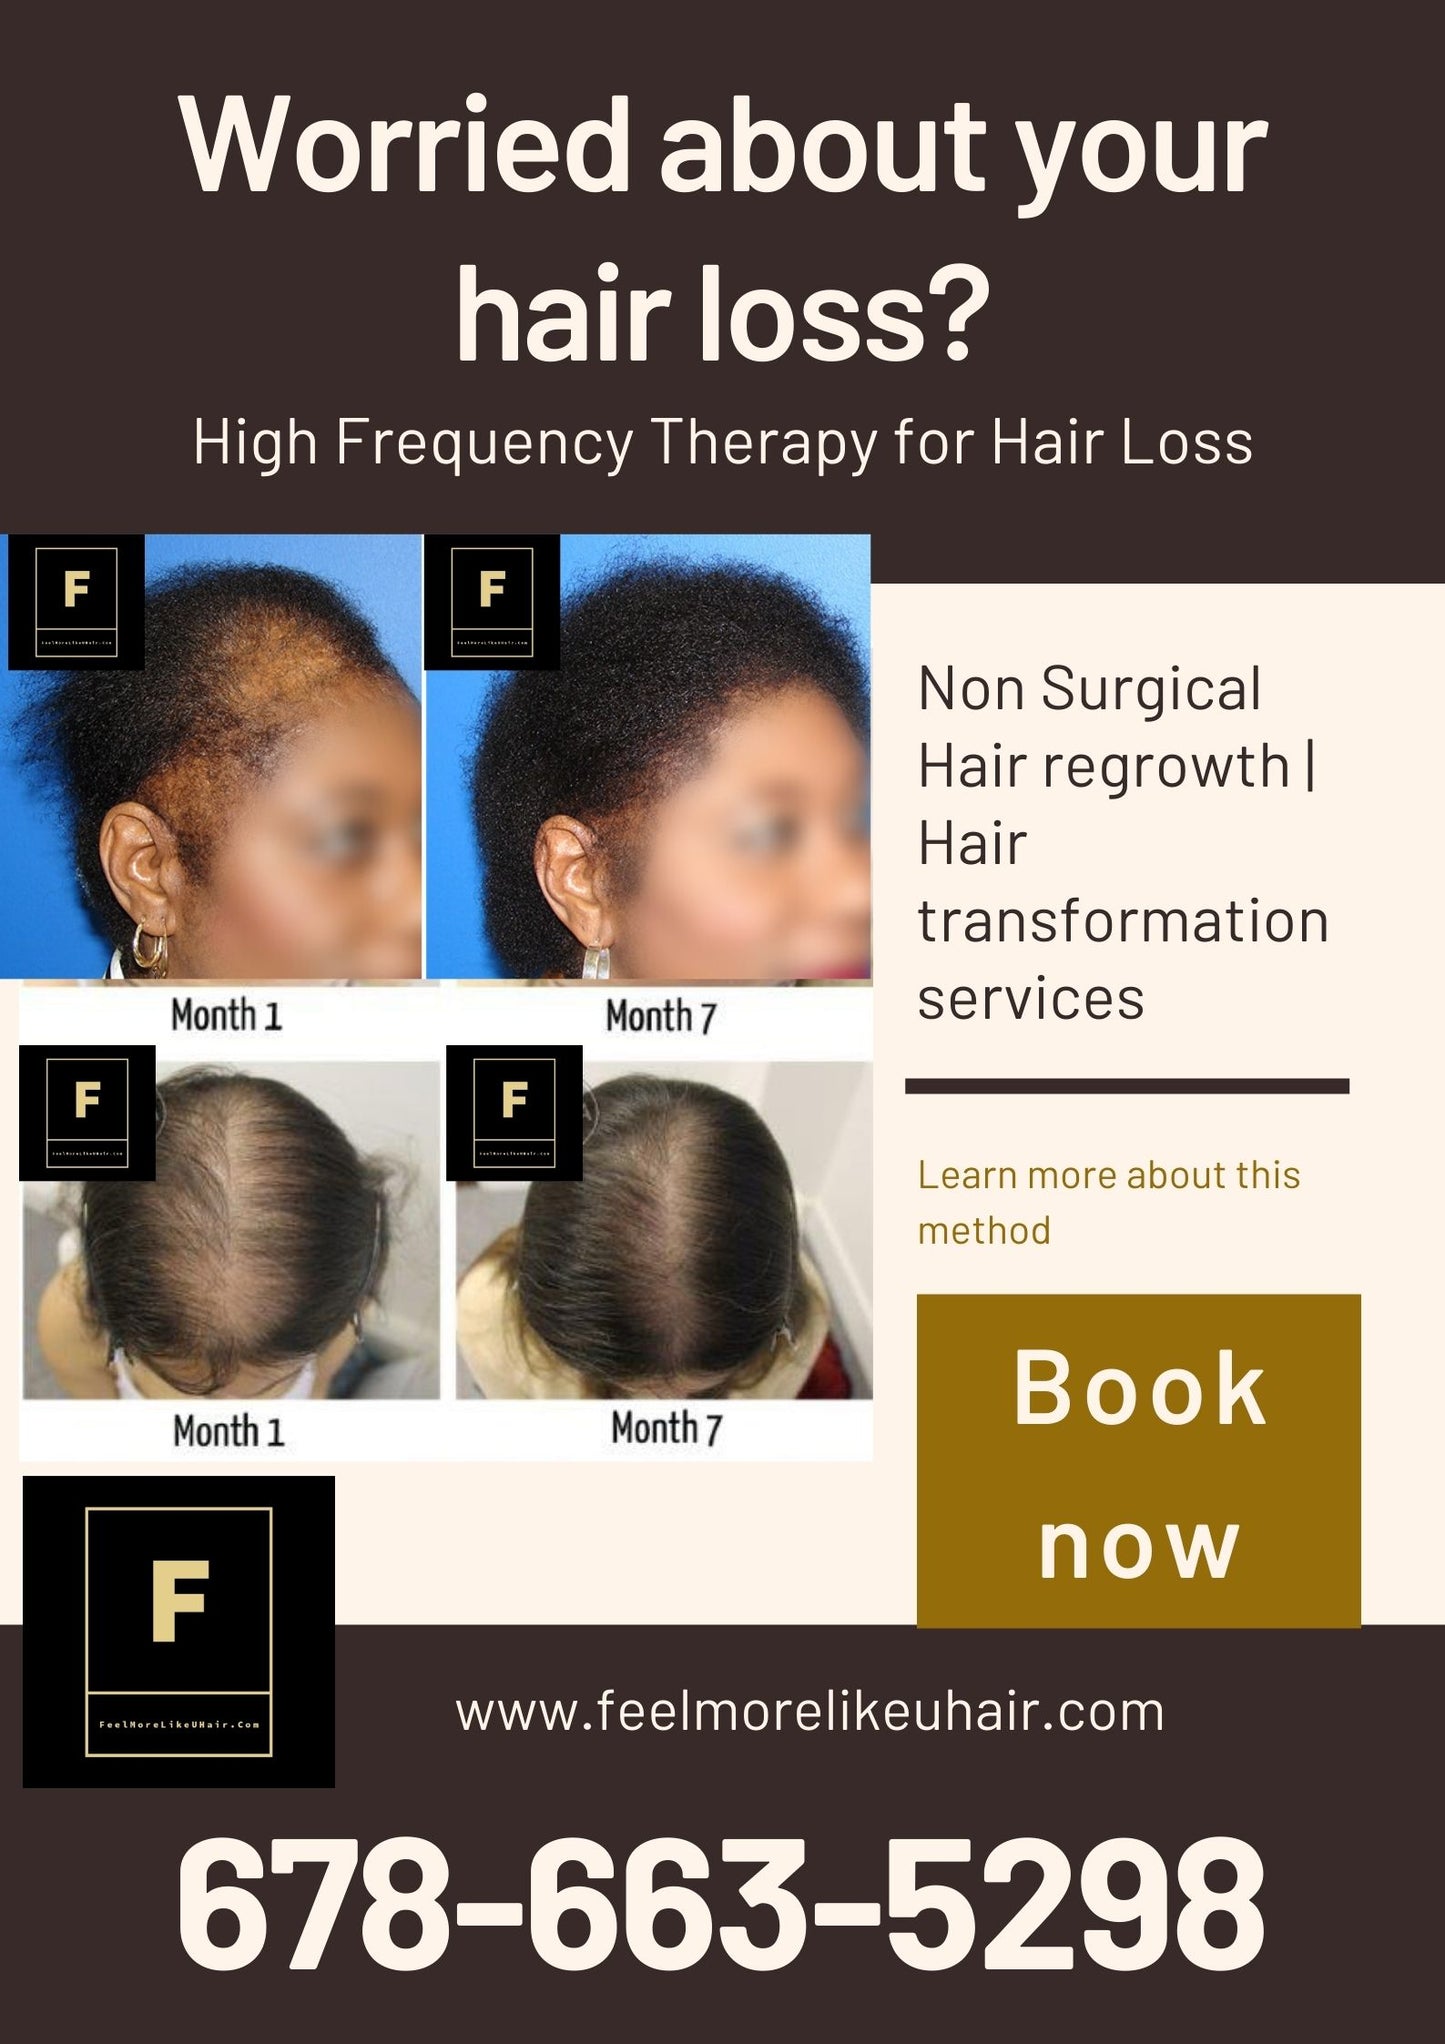 Worried about your hair loss? Hair regrowth - hair transformation services | Make An Appointment